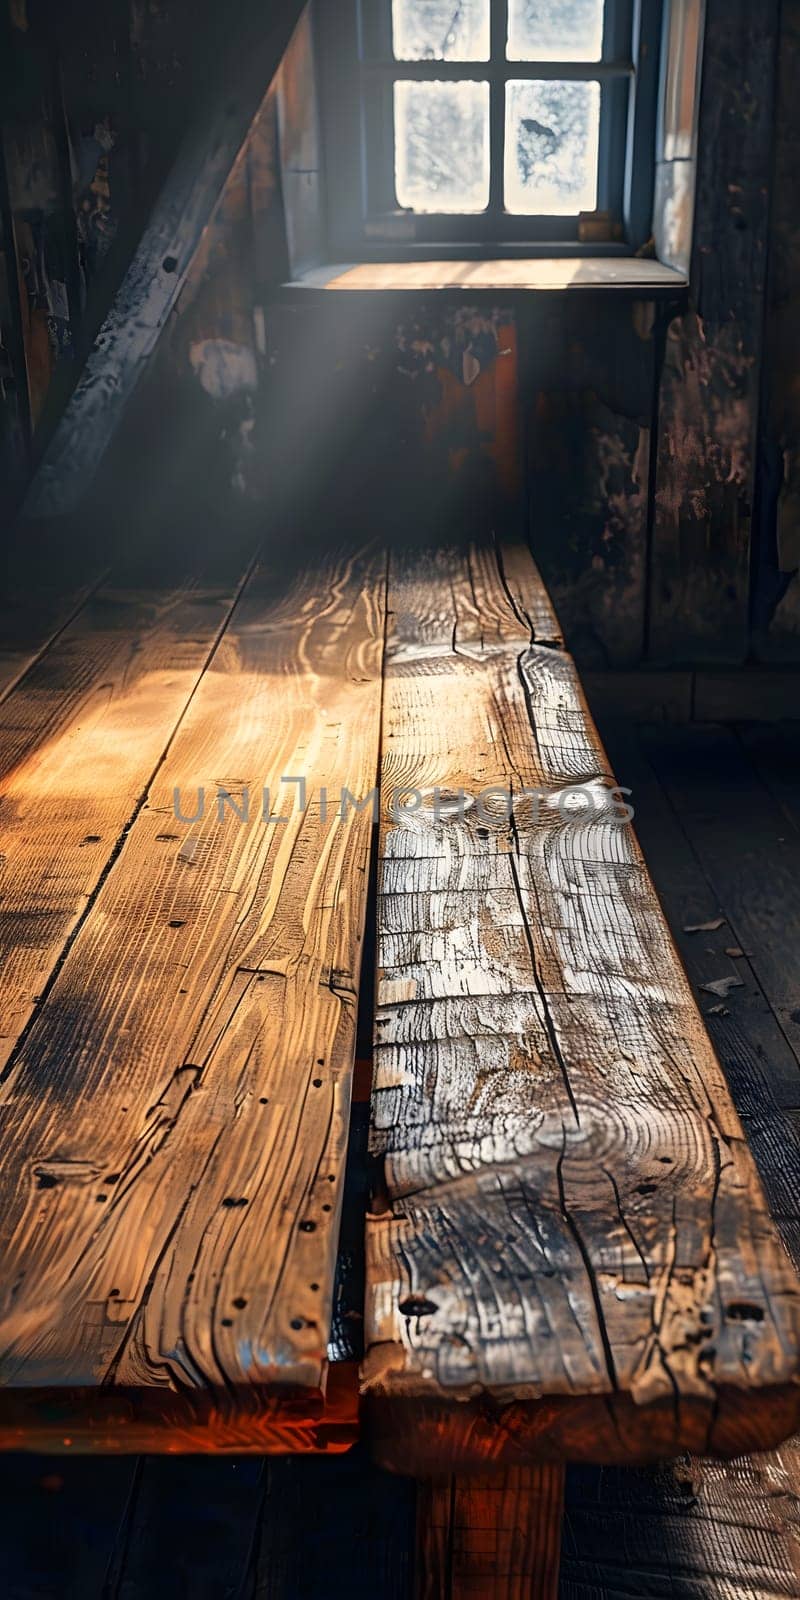 Sunlight streams in on a wooden table through the window by Nadtochiy